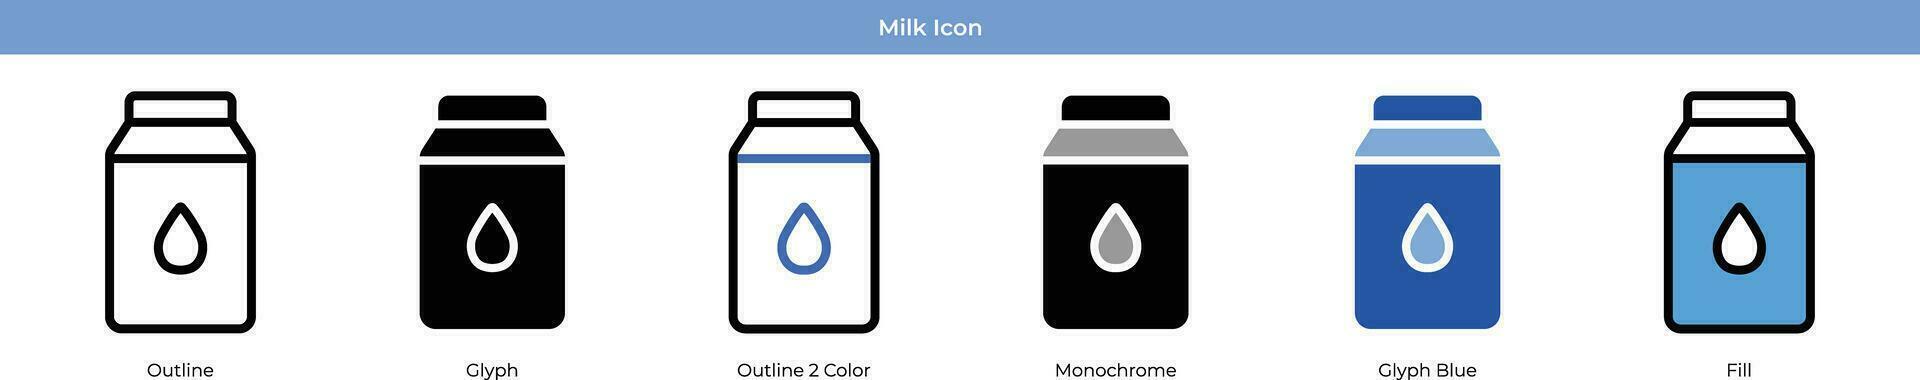 Milk set with 6 style vector